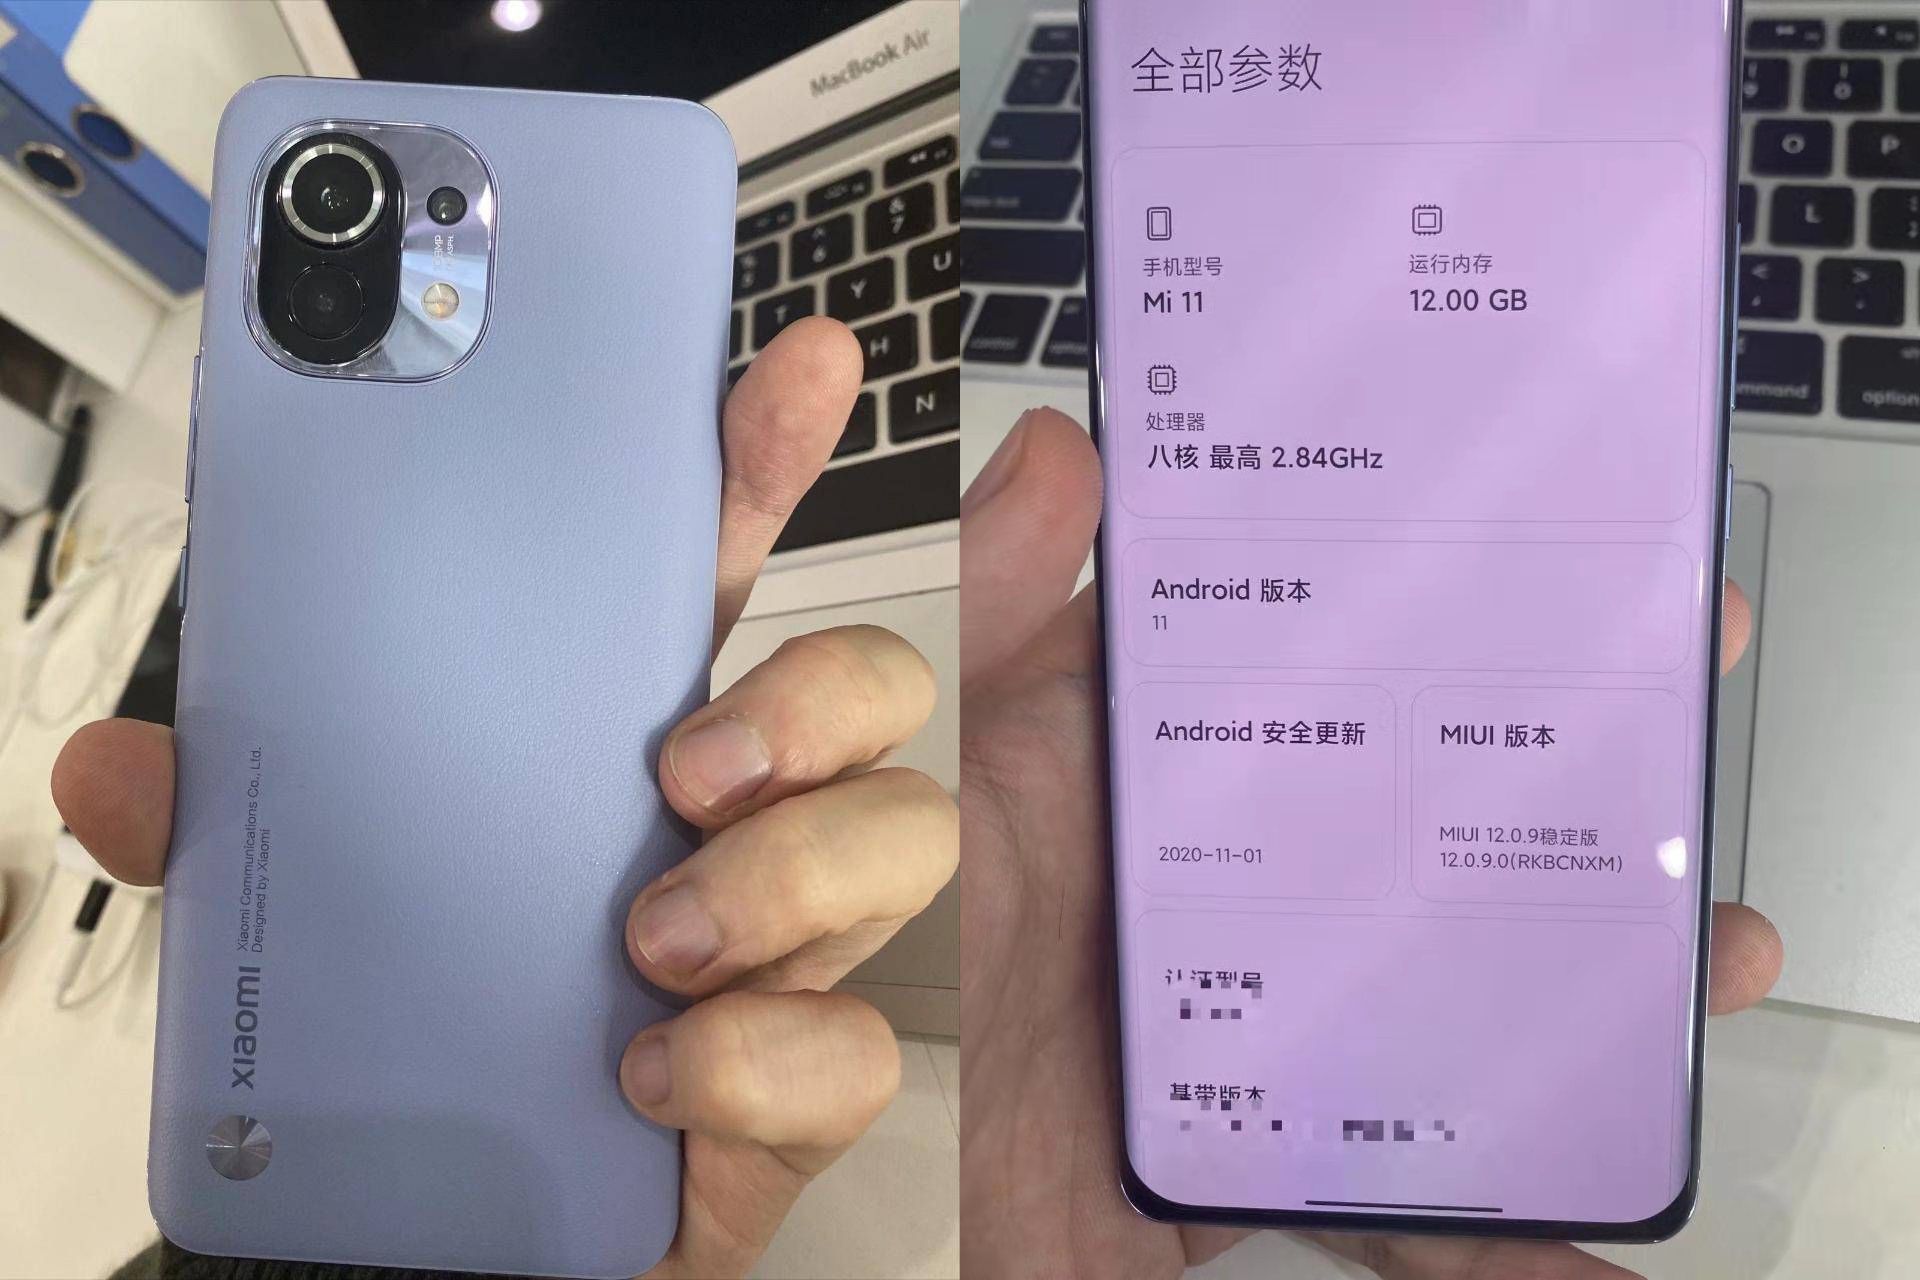 The actual images of the Xiaomi Mi 11 seem to reveal the design and key specifications